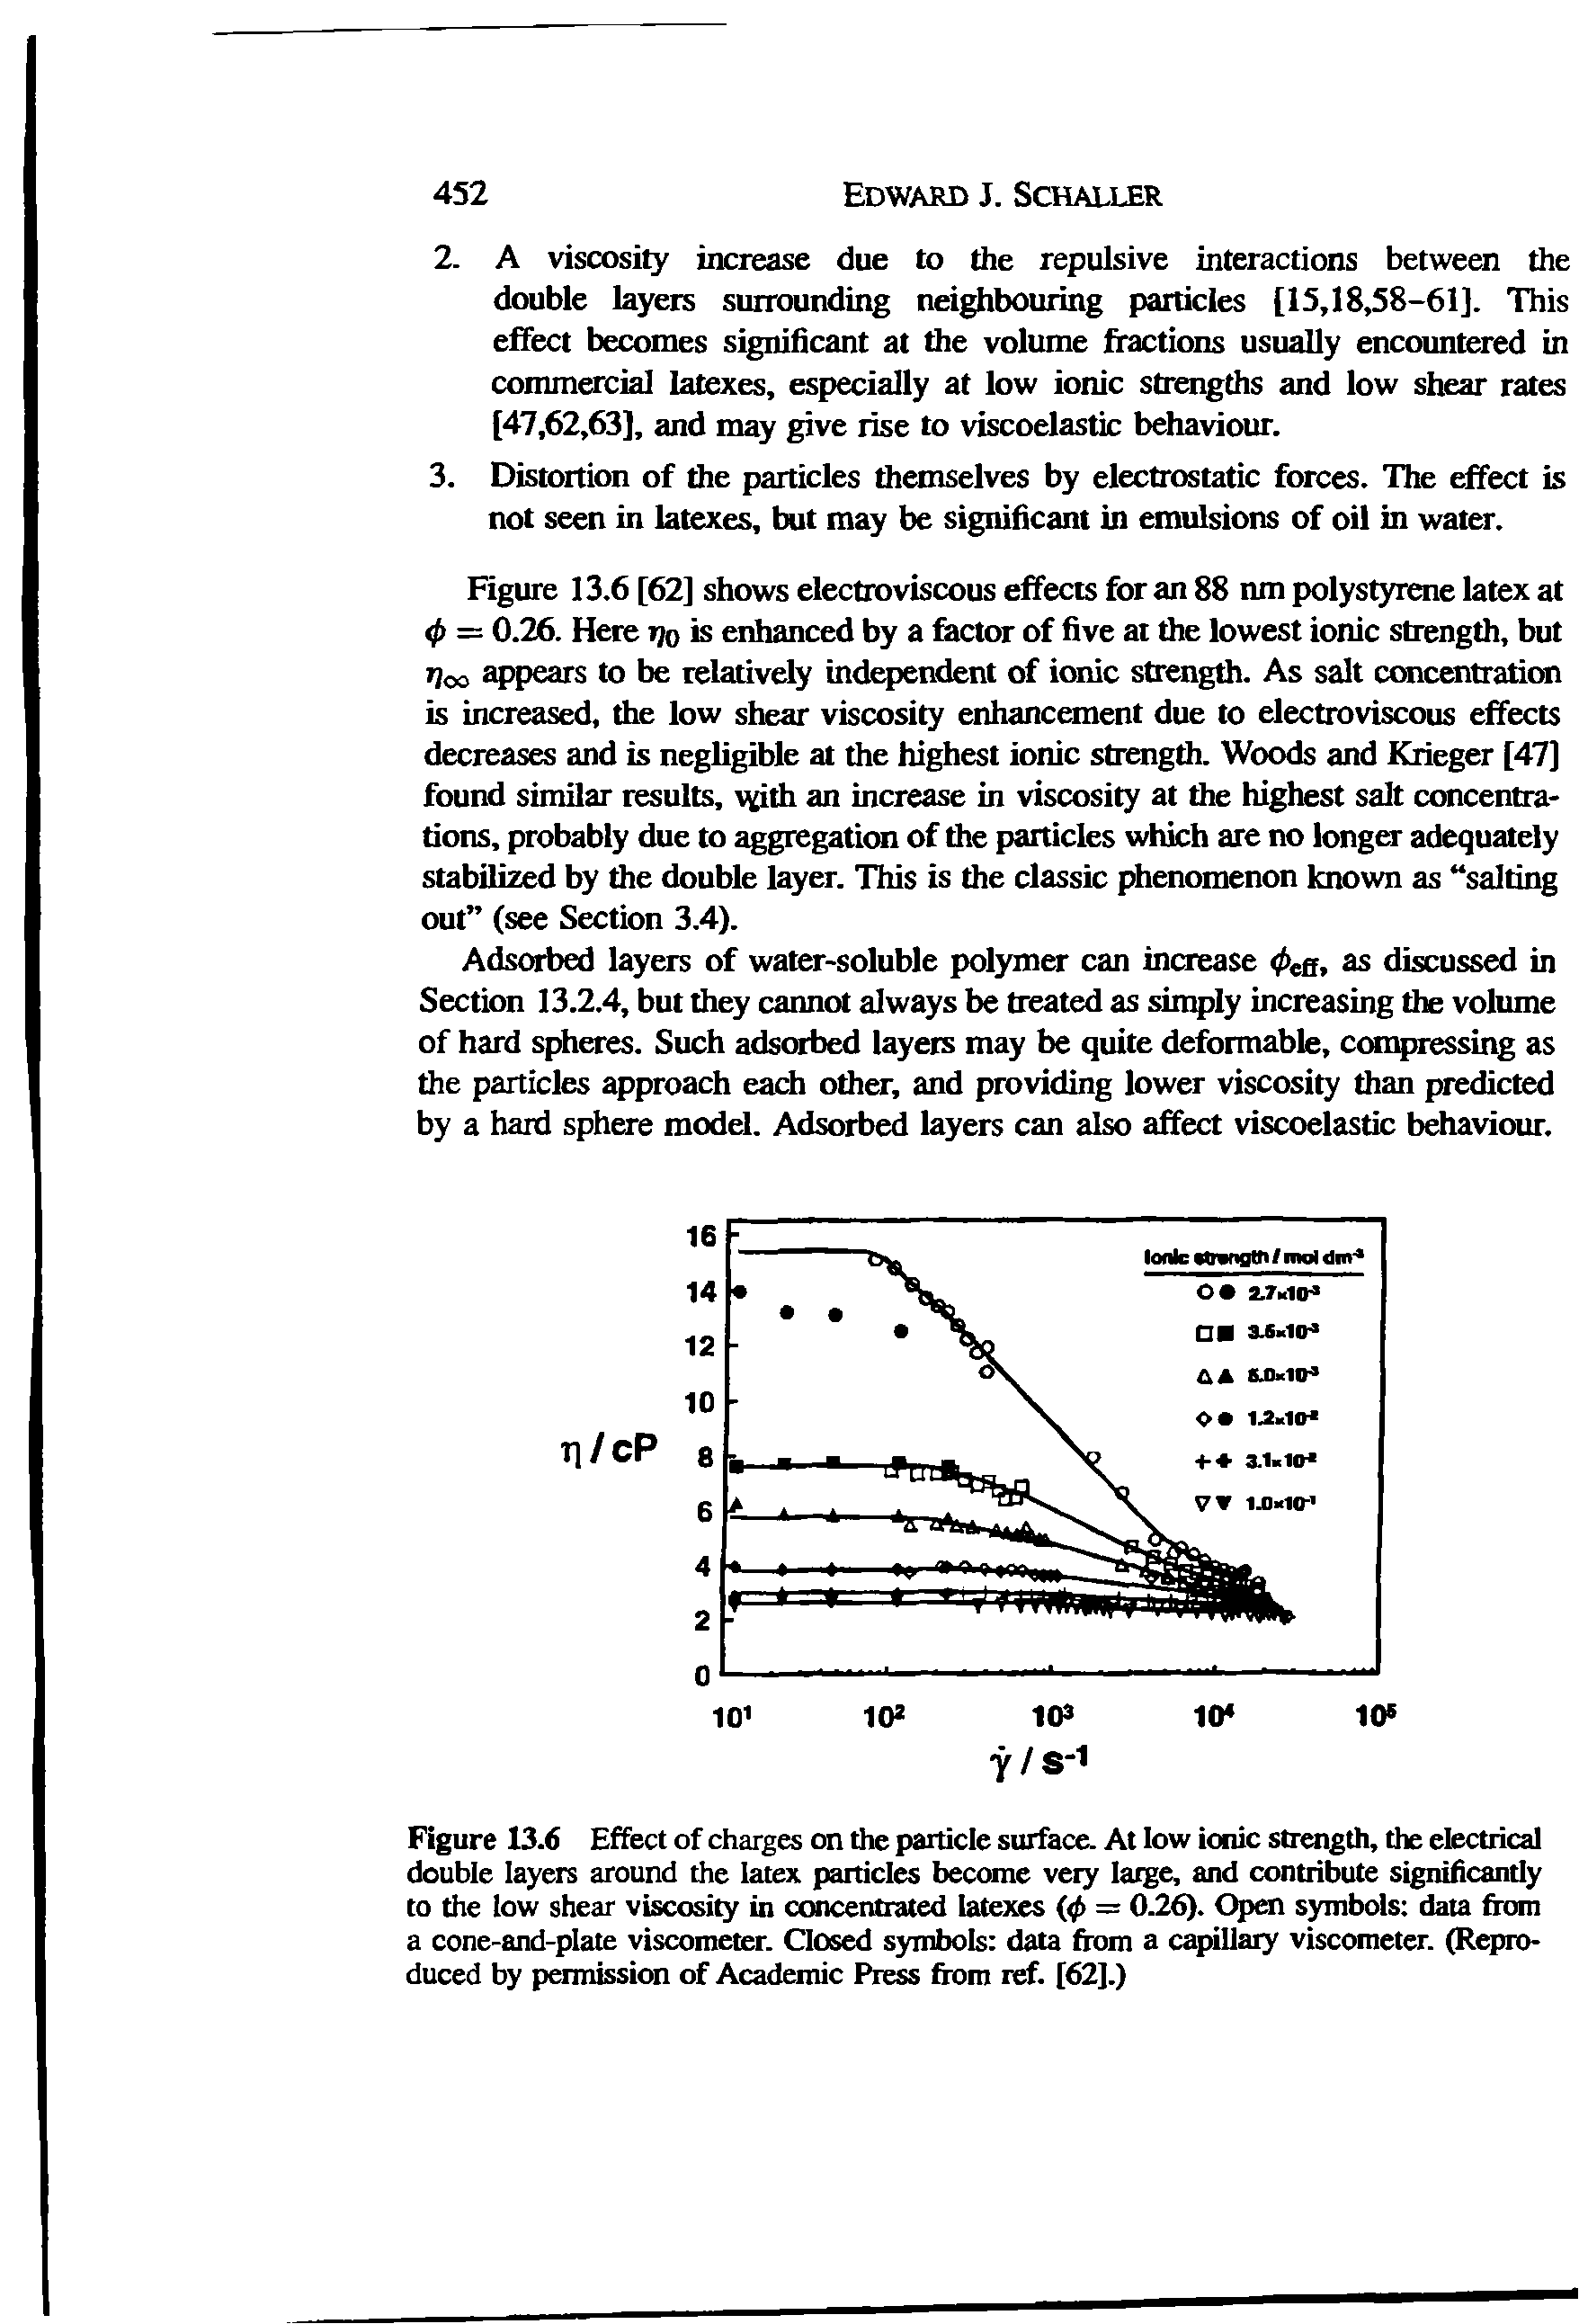 Figure 13.6 Efriect of charges on the particle sur ce. At low ionic strength, the electrical double layers around the latex particles become very large, and contribute significantly to the low shear viscosity in concentrated latexes (0 = 0.26). Open symbols data from a cone-and-plate viscometer. Closed symbols data from a ct rillaiy viscometer. (Rqno-duced by peimissicRi of Acadonic Press from lef. [62].)...